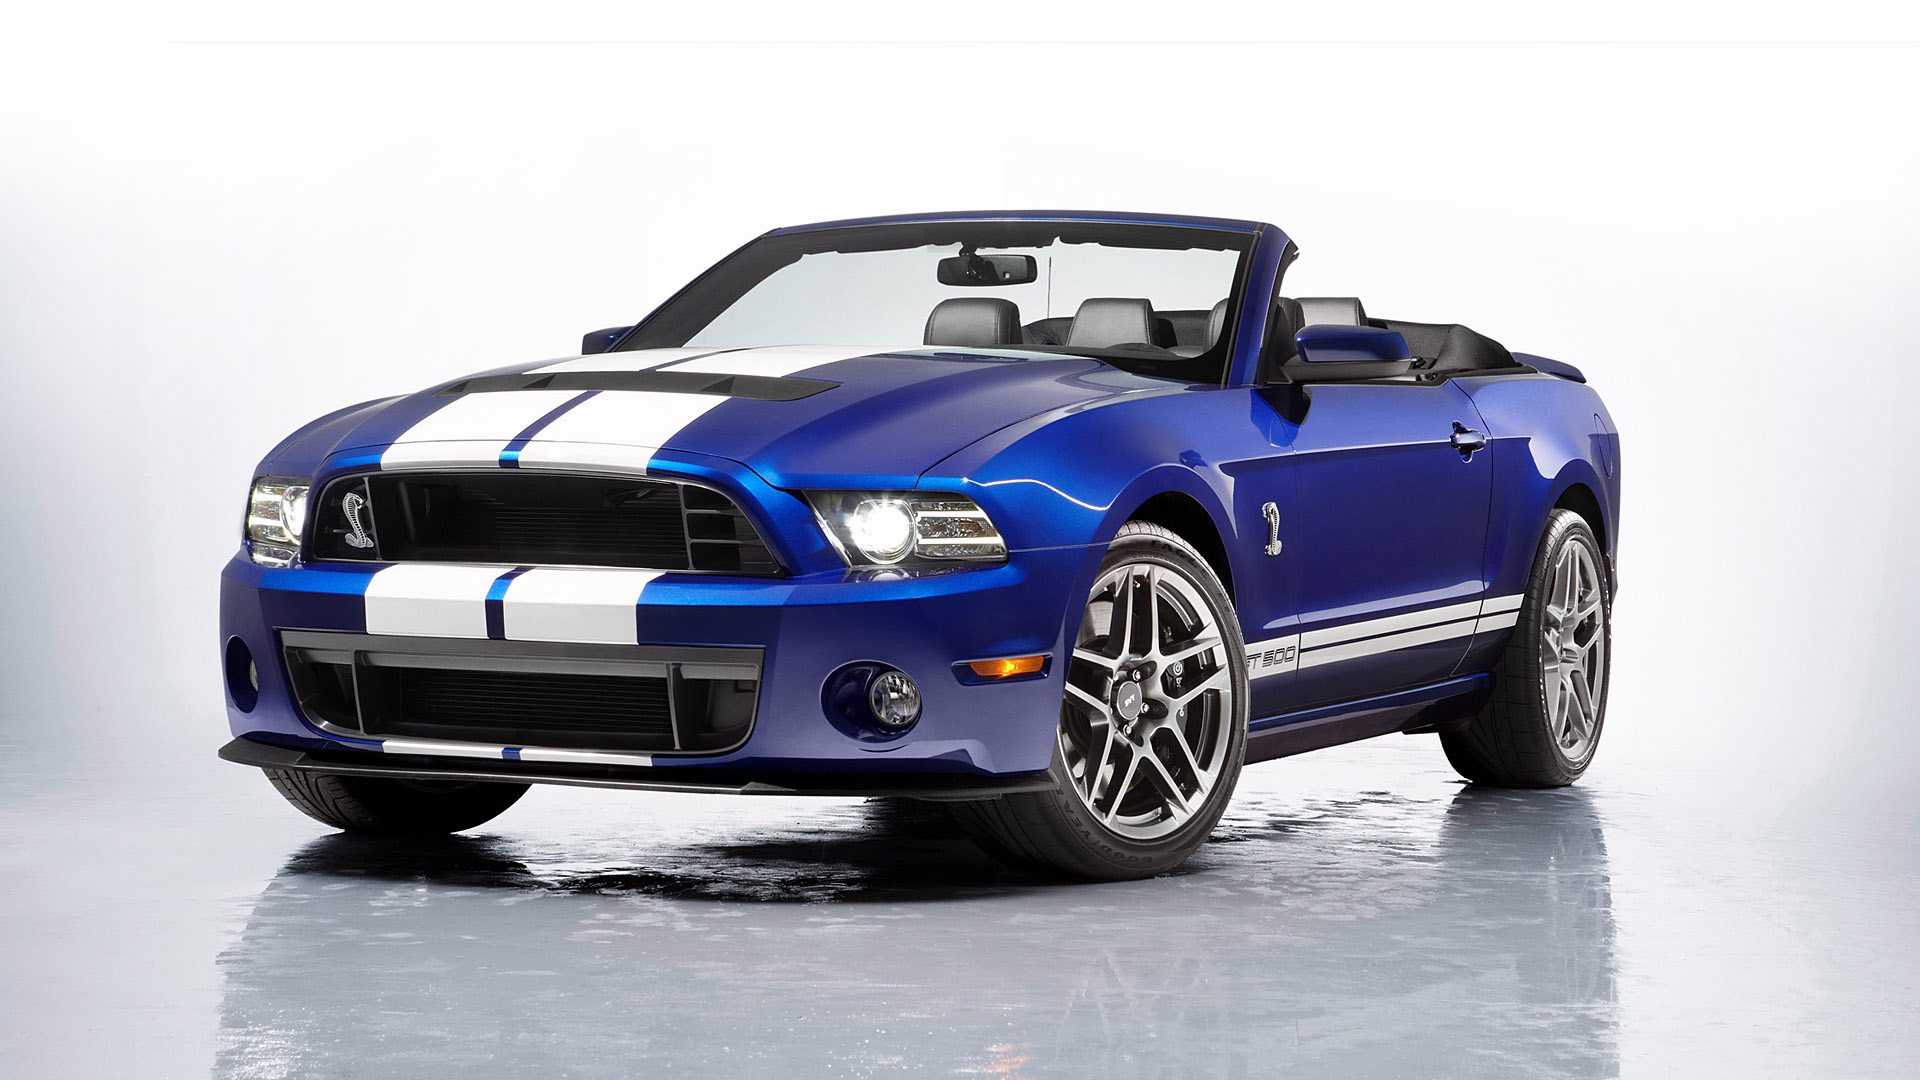  2013 Ford Shelby Mustang GT500 Wallpaper.